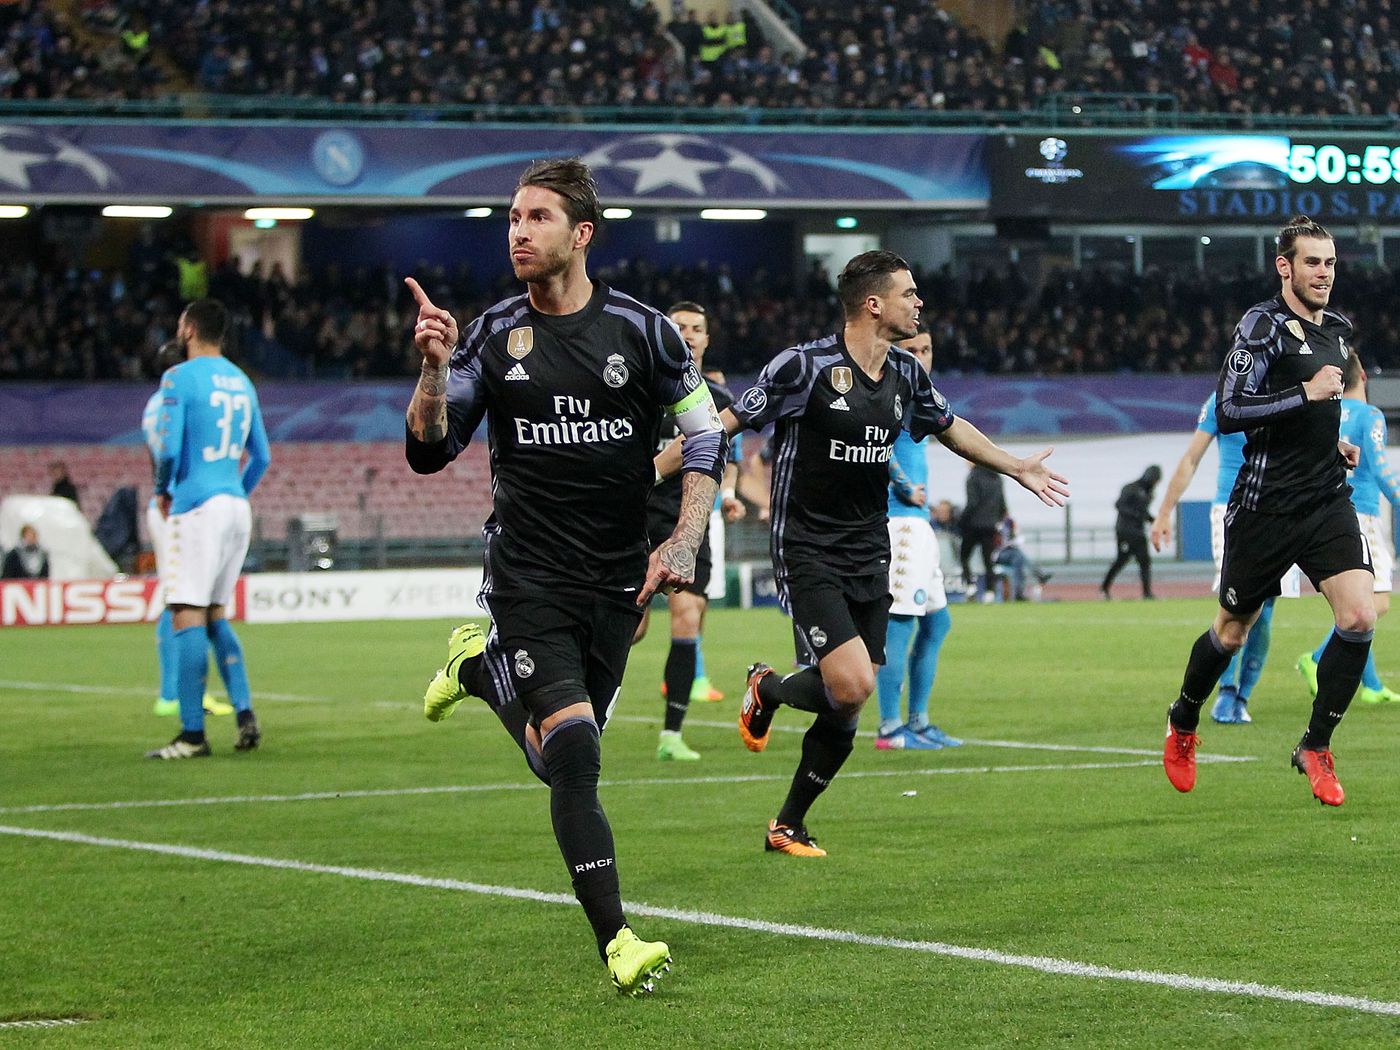 Match Review 2016/17 Champions League R16: Napoli 1 - 3 Real Madrid -  Managing Madrid